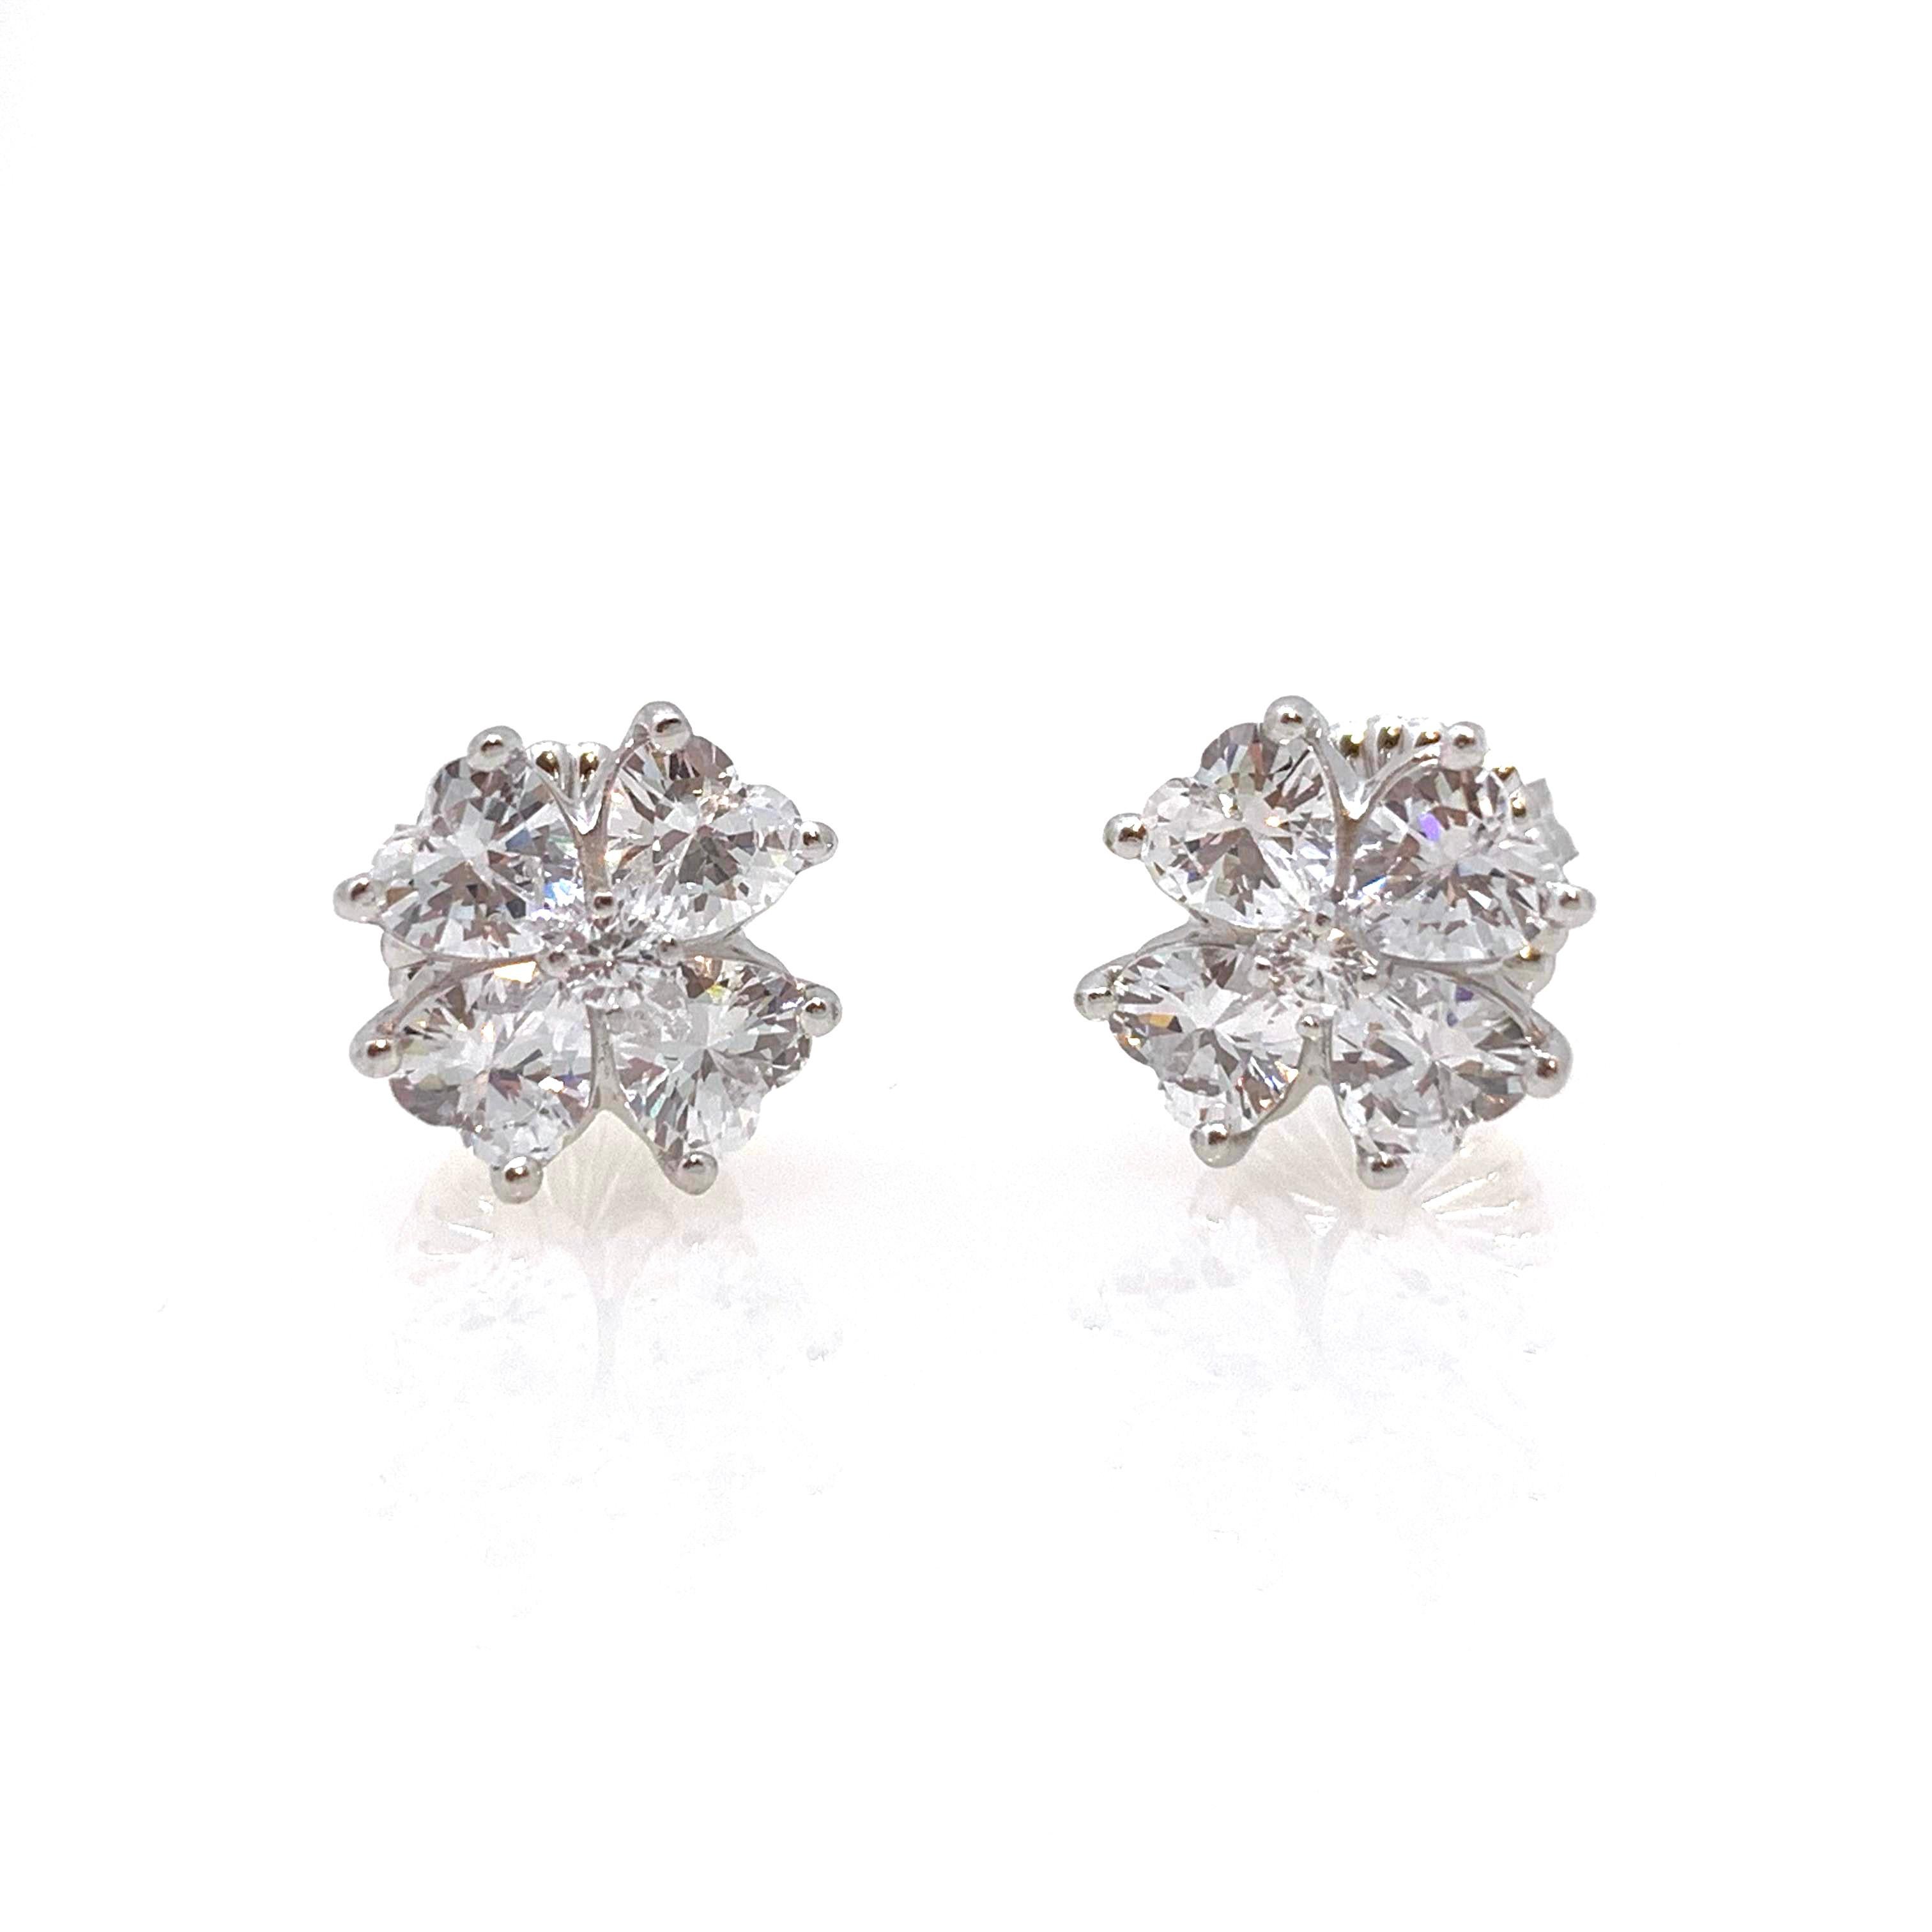 Stunning Simulated Diamond Flower Stud Sterling Silver Earrings

These classic earrings feature clustered of simulated diamond cz handset in platinum rhodium plated sterling silver. The earrings measured 1/2